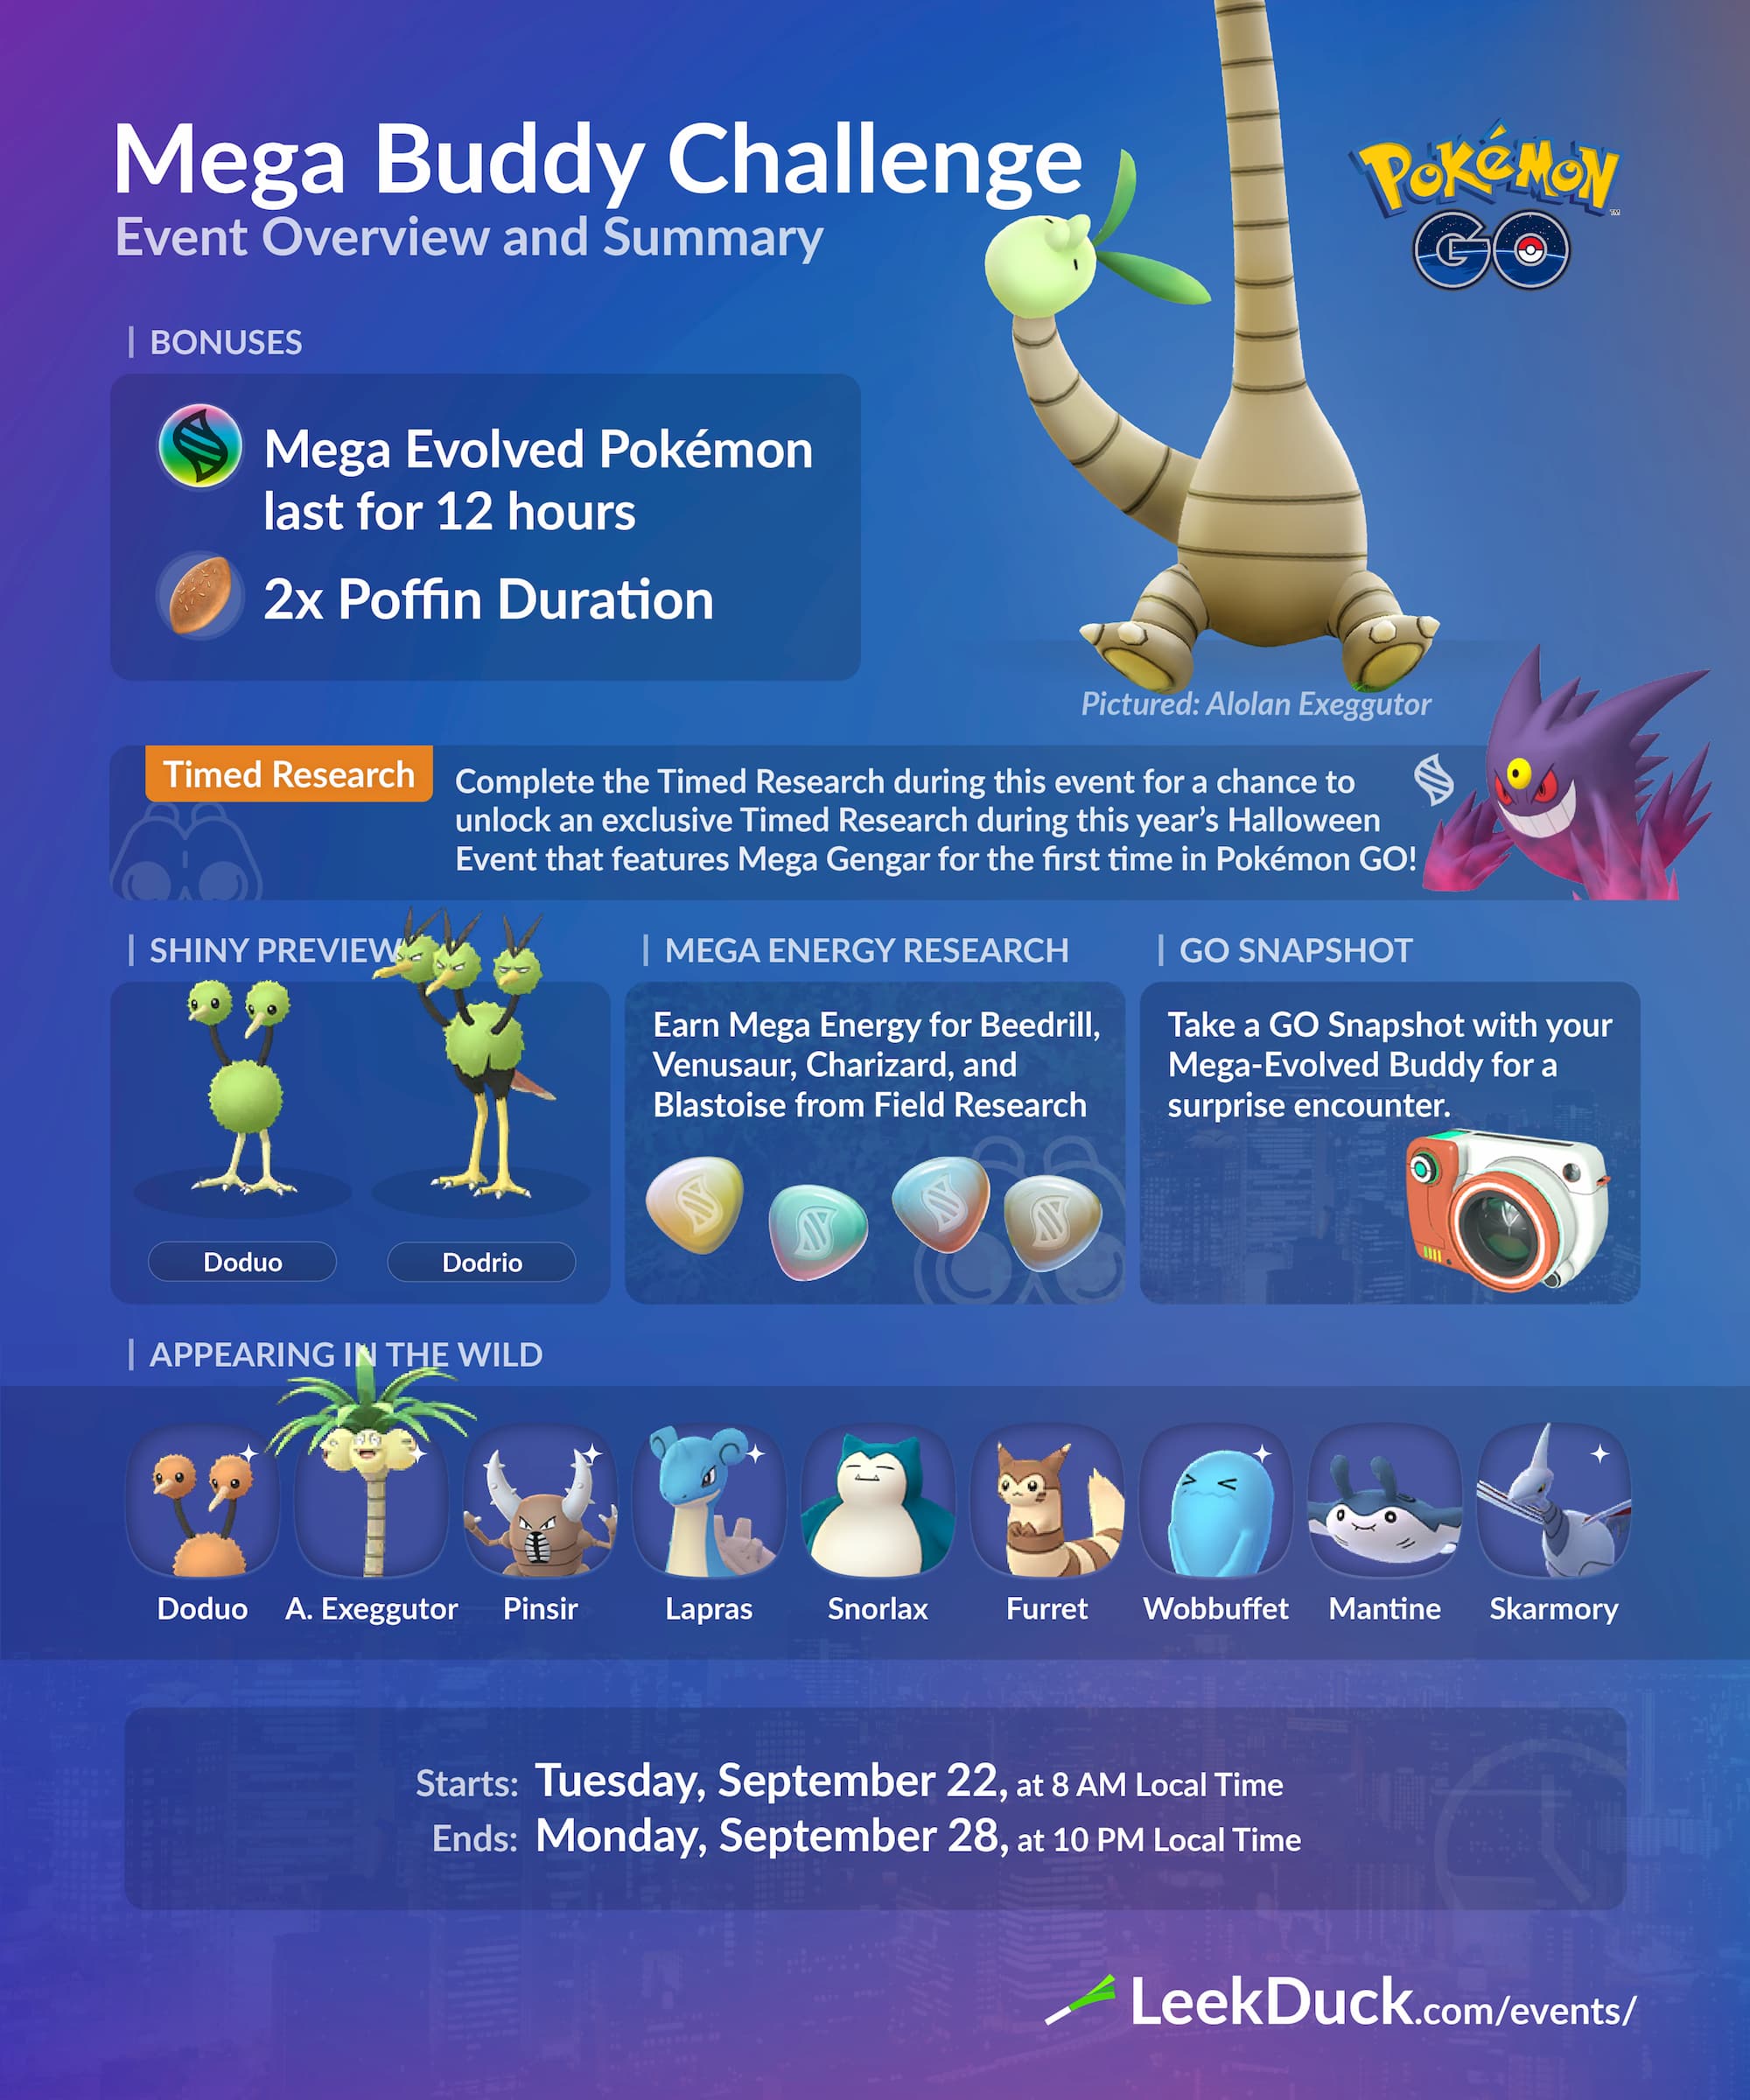 Mega Energy Can Now Be Earned By Walking & Catching In Pokémon GO